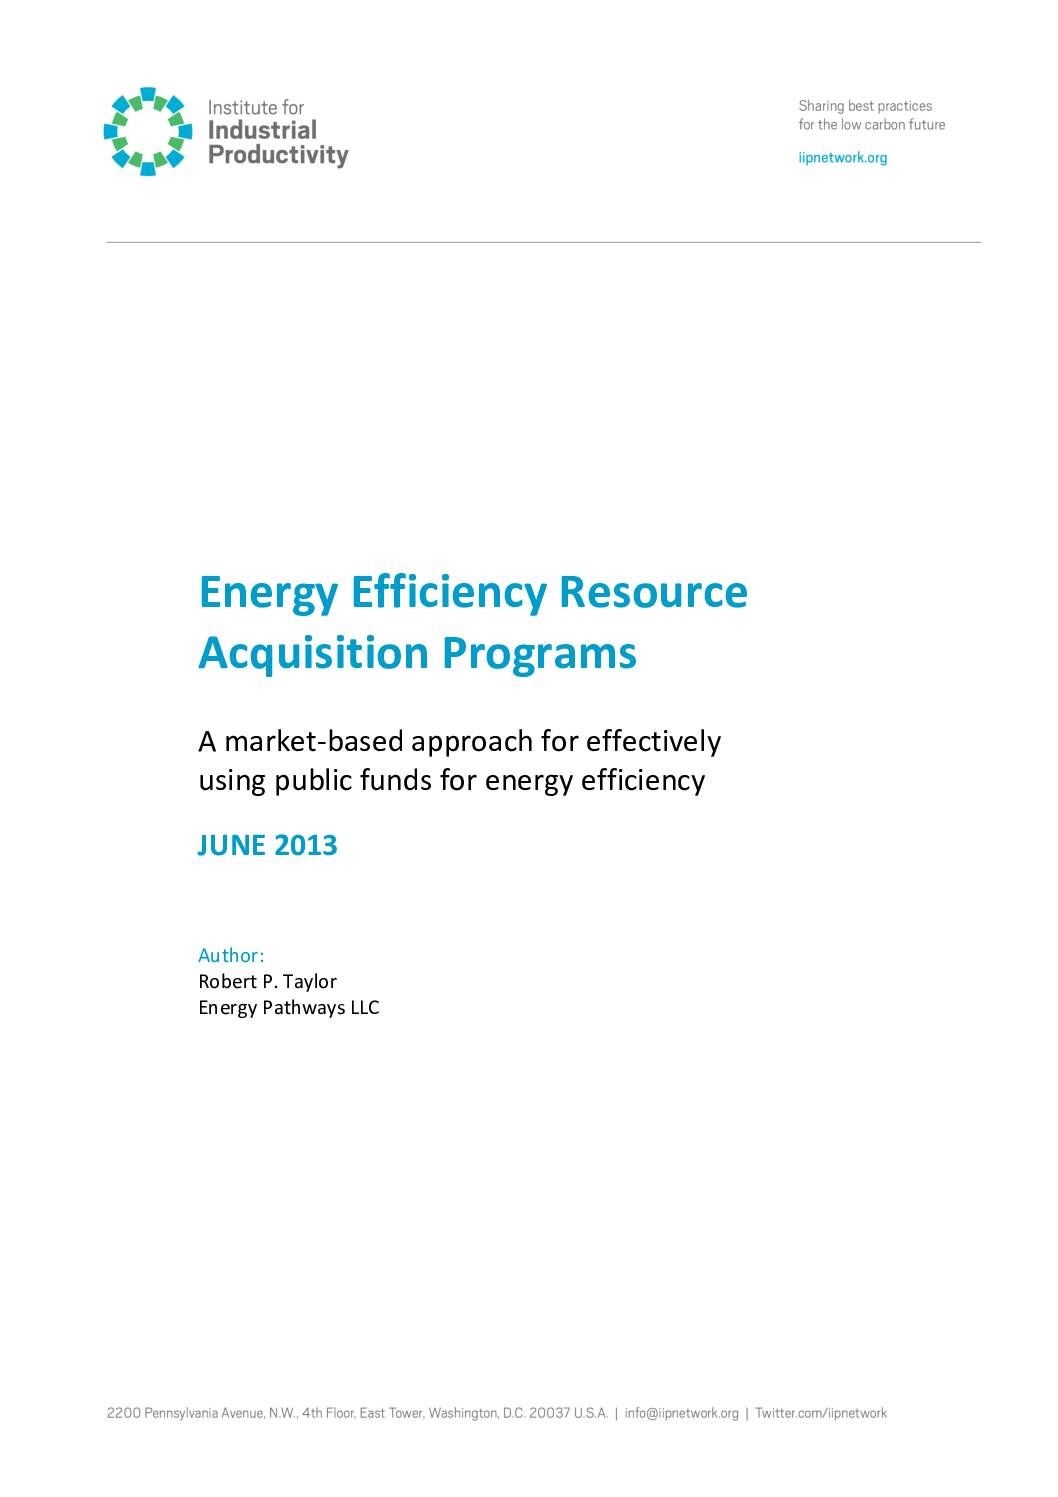 Energy Efficiency Resource Acquisition Programs: A market-based approach for effectively using public funds for energy efficiency